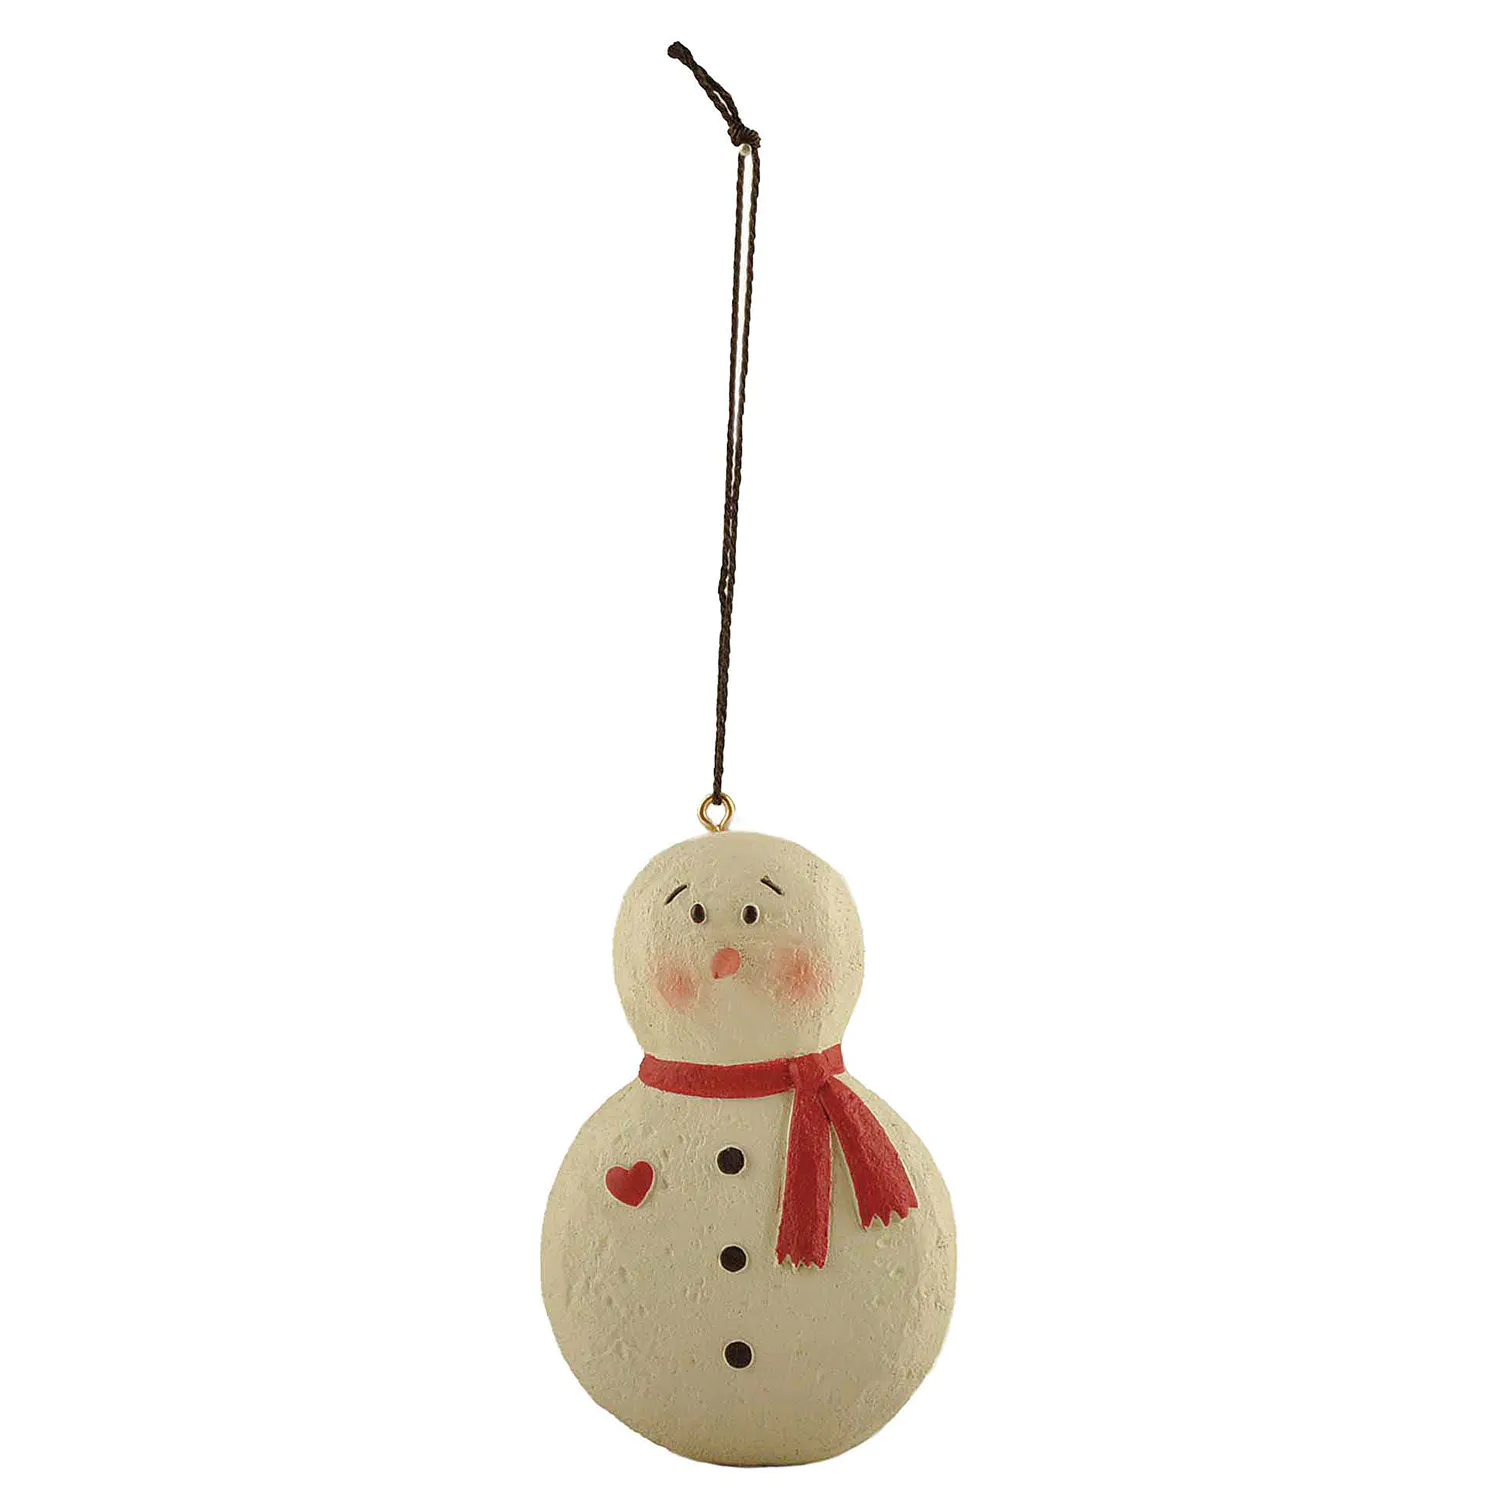 New Design Resin Christmas Crafts Cute Snowman w Red Scarf Ornament for Home Decor 238-52094